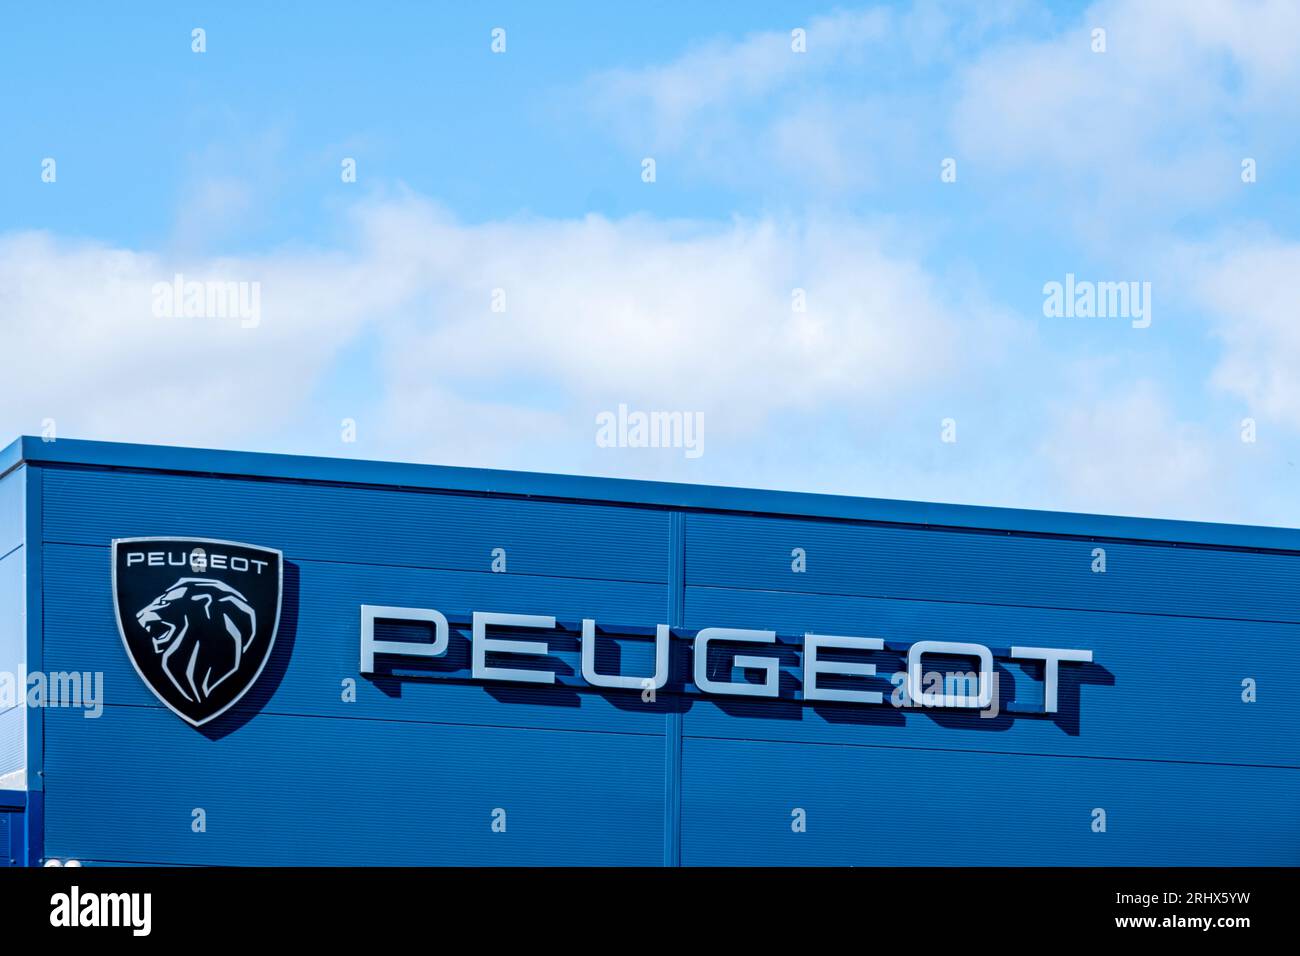 Peugeot sign and logo on outside wall Stock Photo